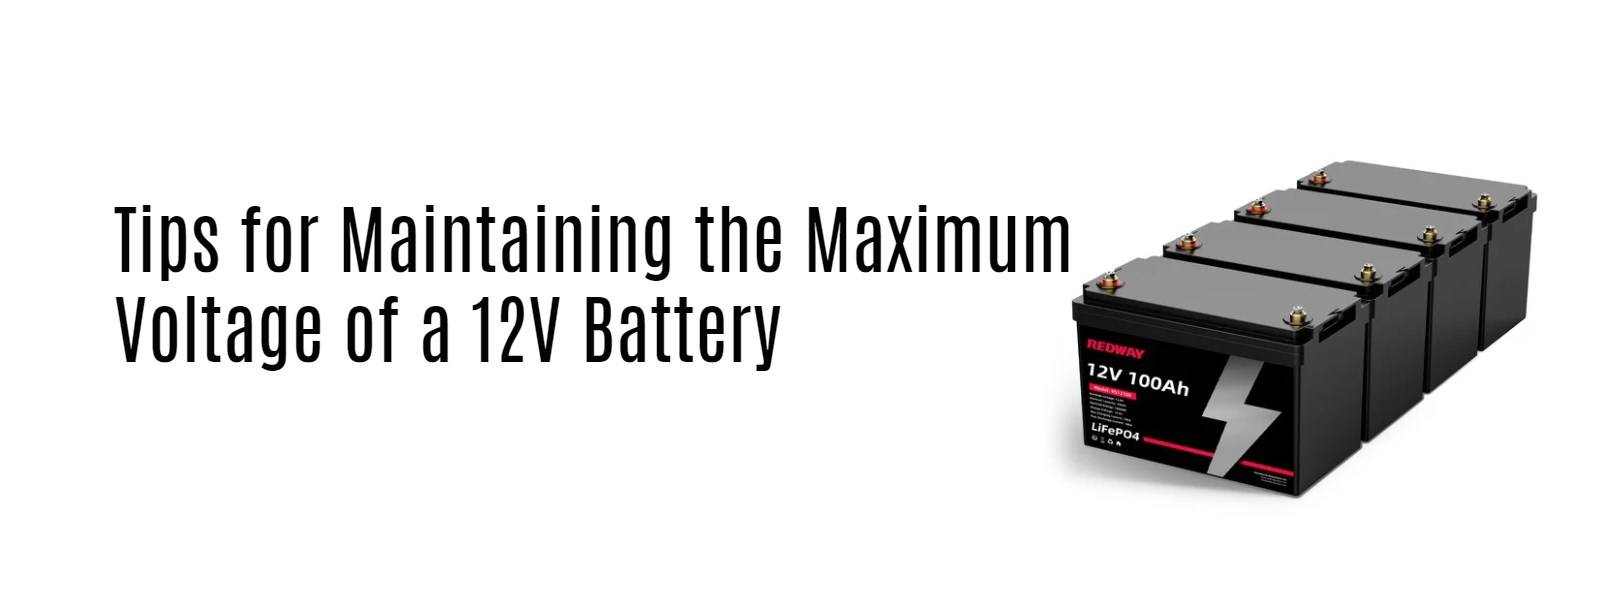 Tips for Maintaining the Maximum Voltage of a 12V Battery. 12V 100Ah lifepo4 battery rv factory